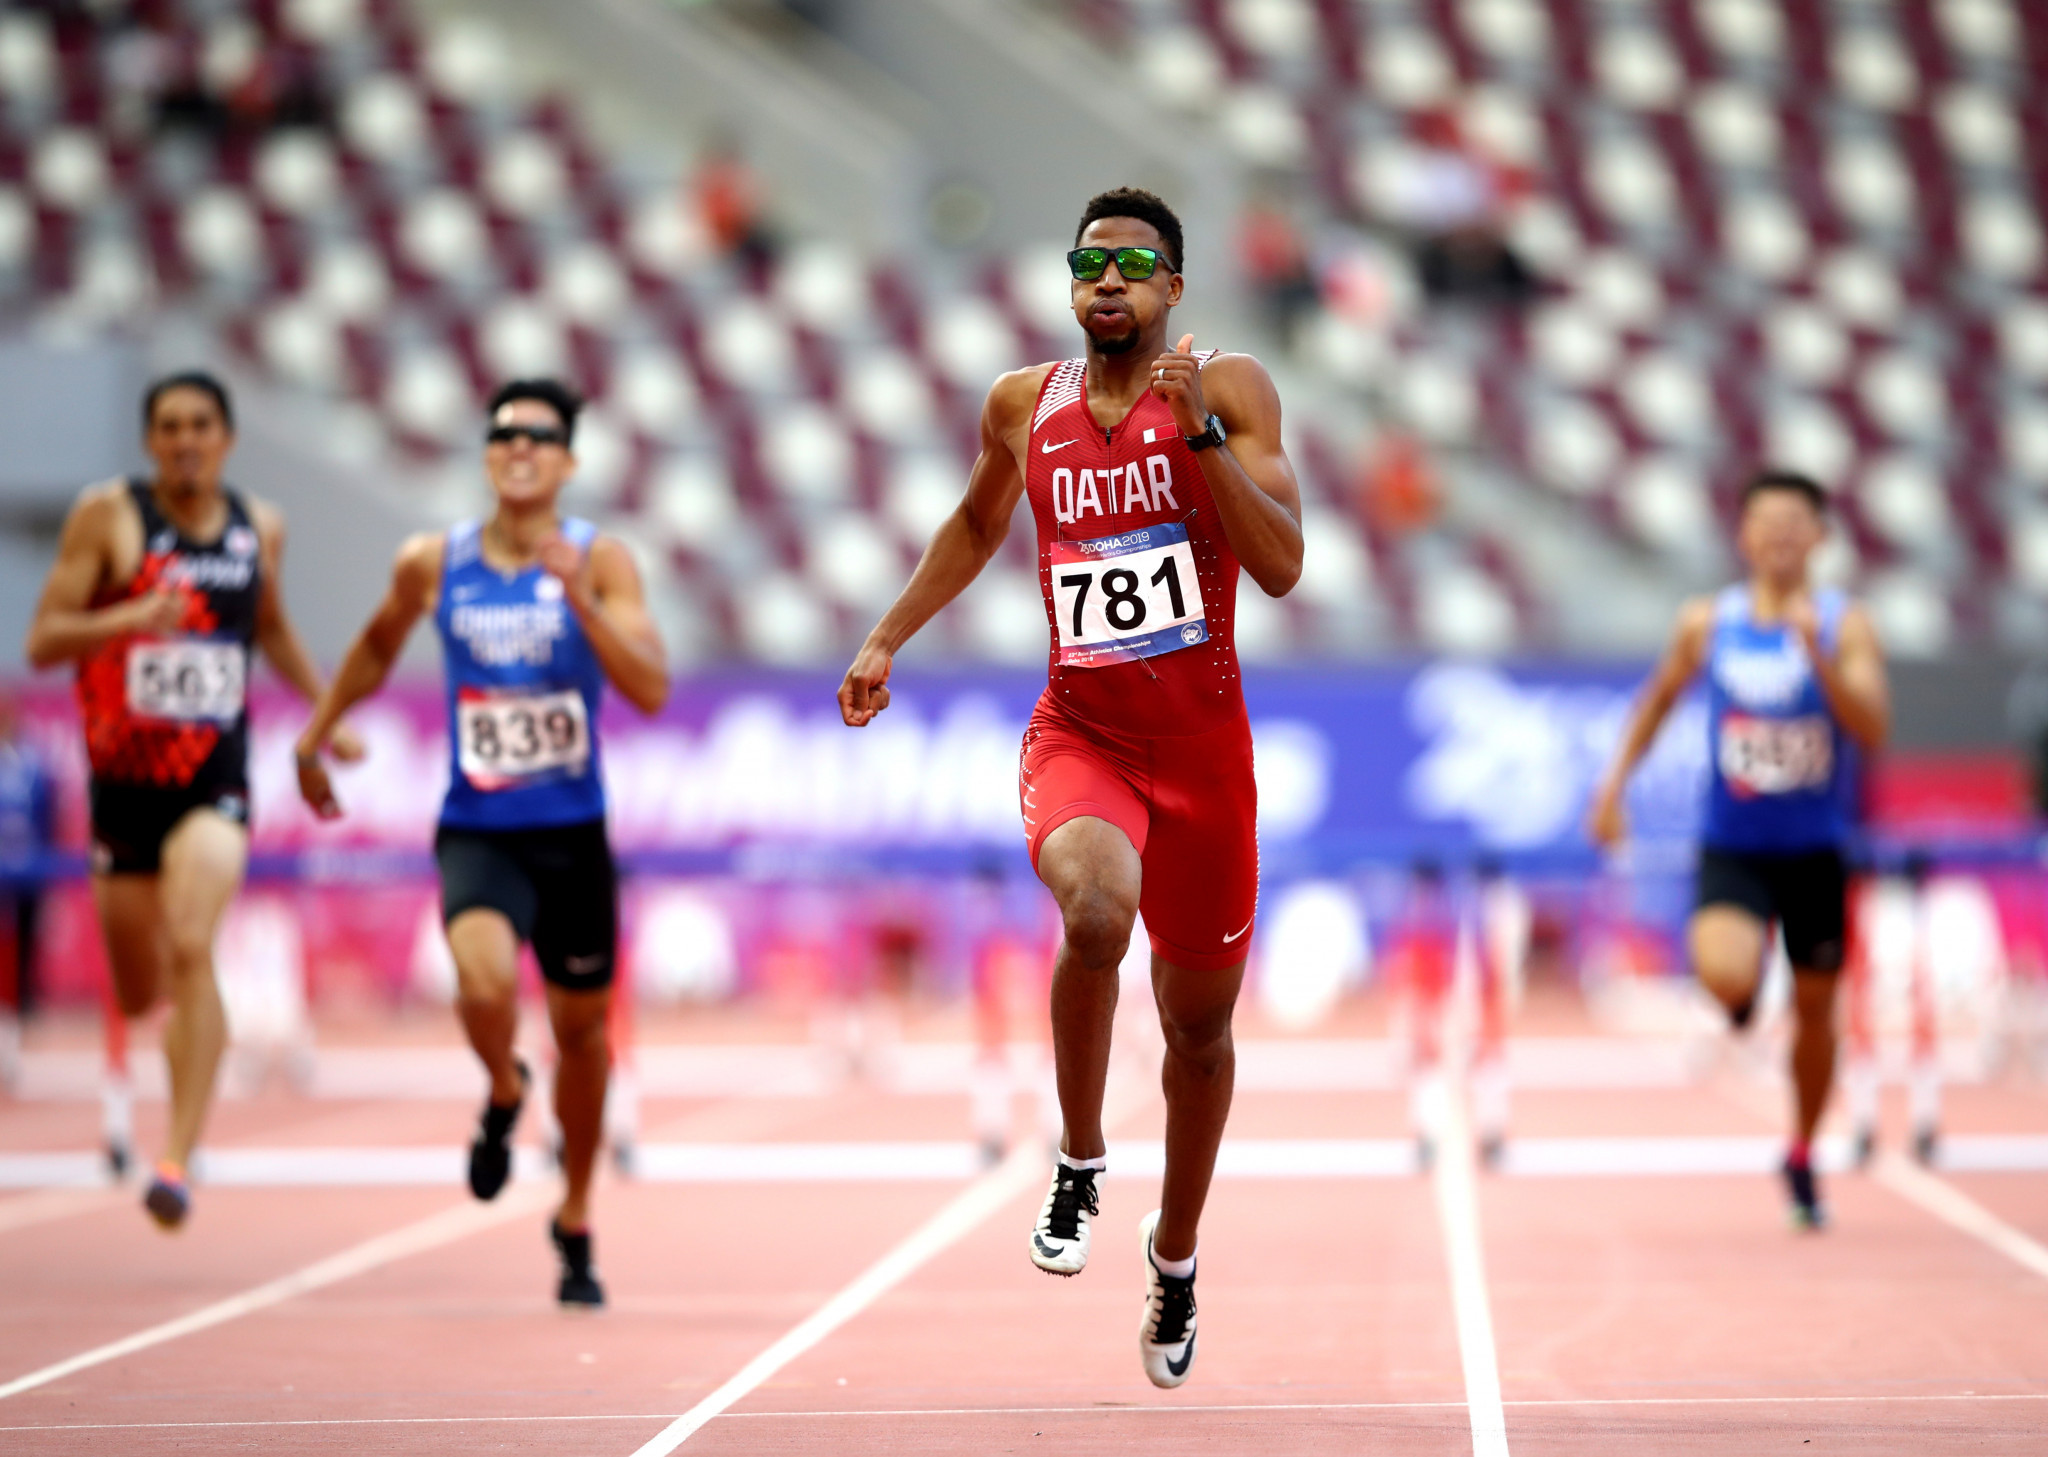 Home favourite Samba takes men's 400m hurdles title on day two of Asian Athletics Championships in Doha